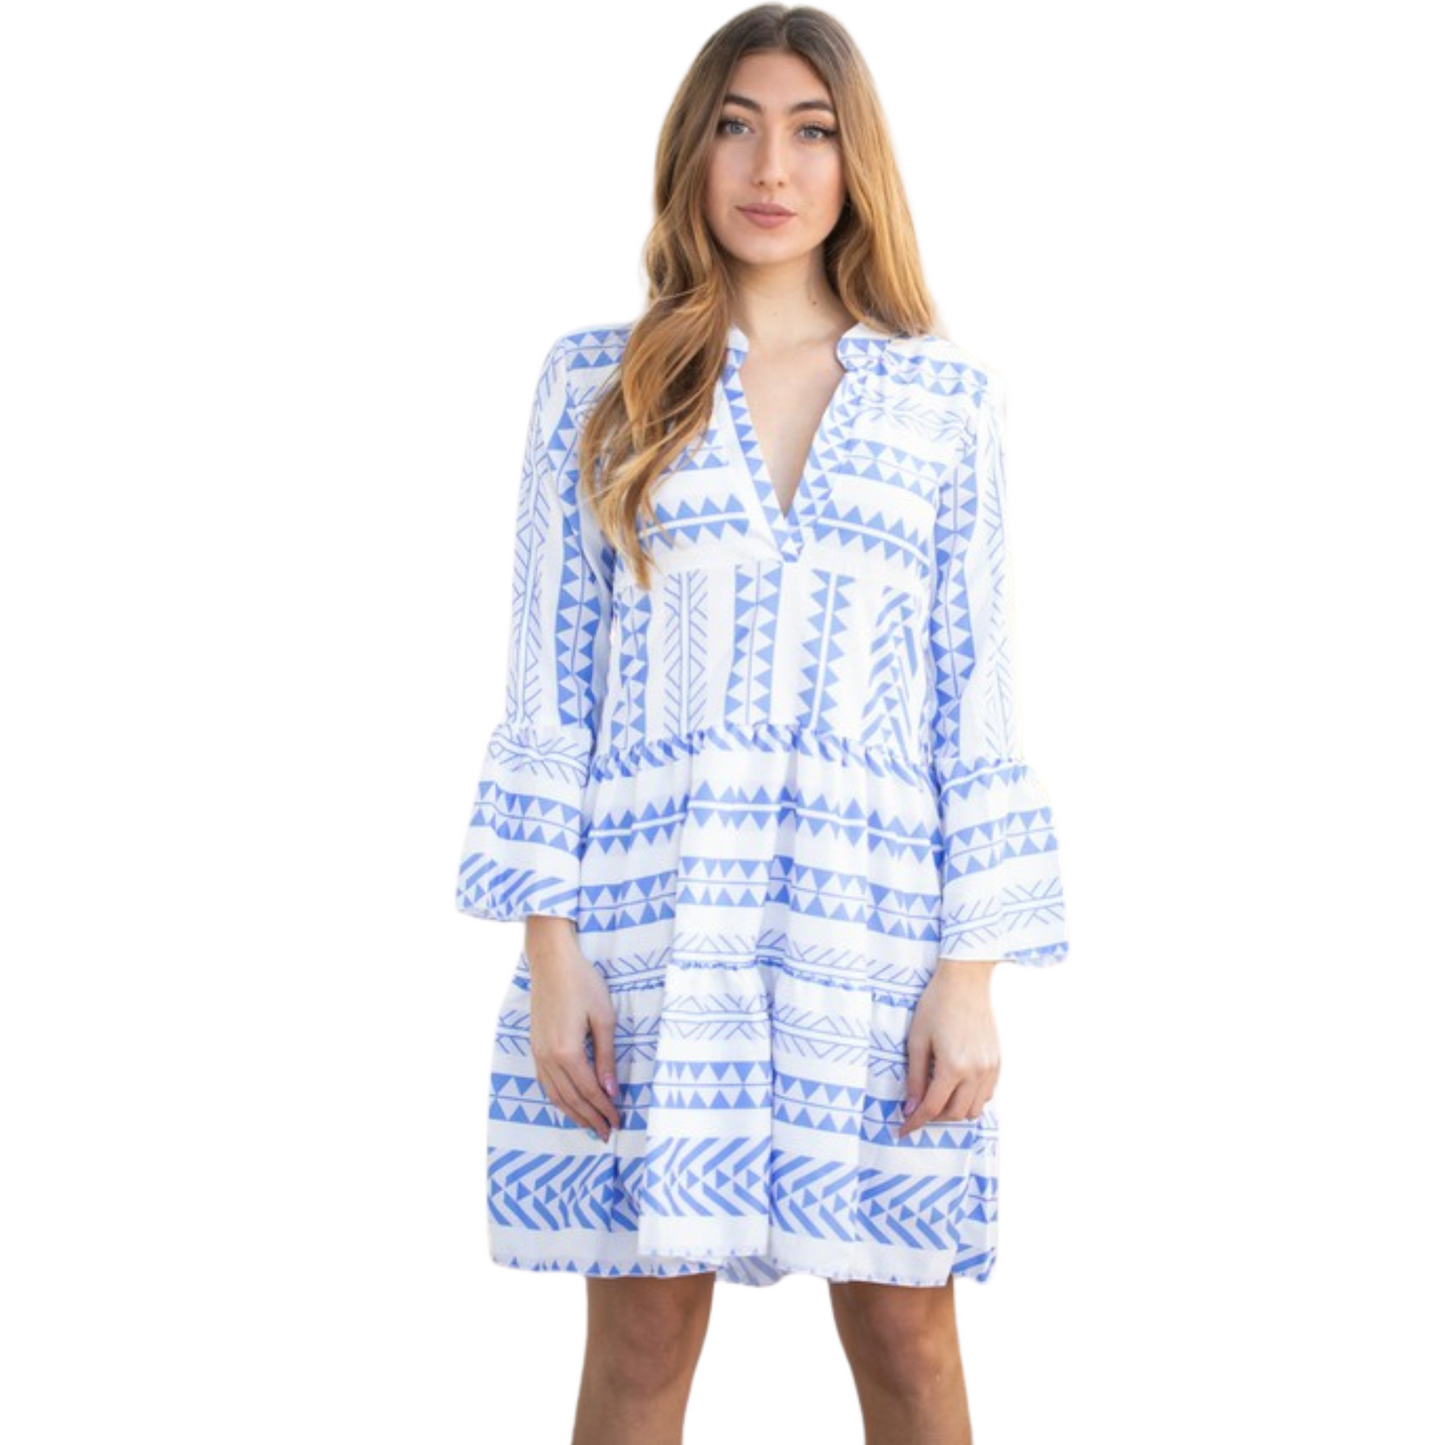 Show confidence and grace in this stylish tiered dress. The long sleeves provide arm coverage and the v neck flaunts the collarbone. The blue and white print adds a touch of subtle color, perfect for any occasion. An impeccable choice for fashion-forward ladies.